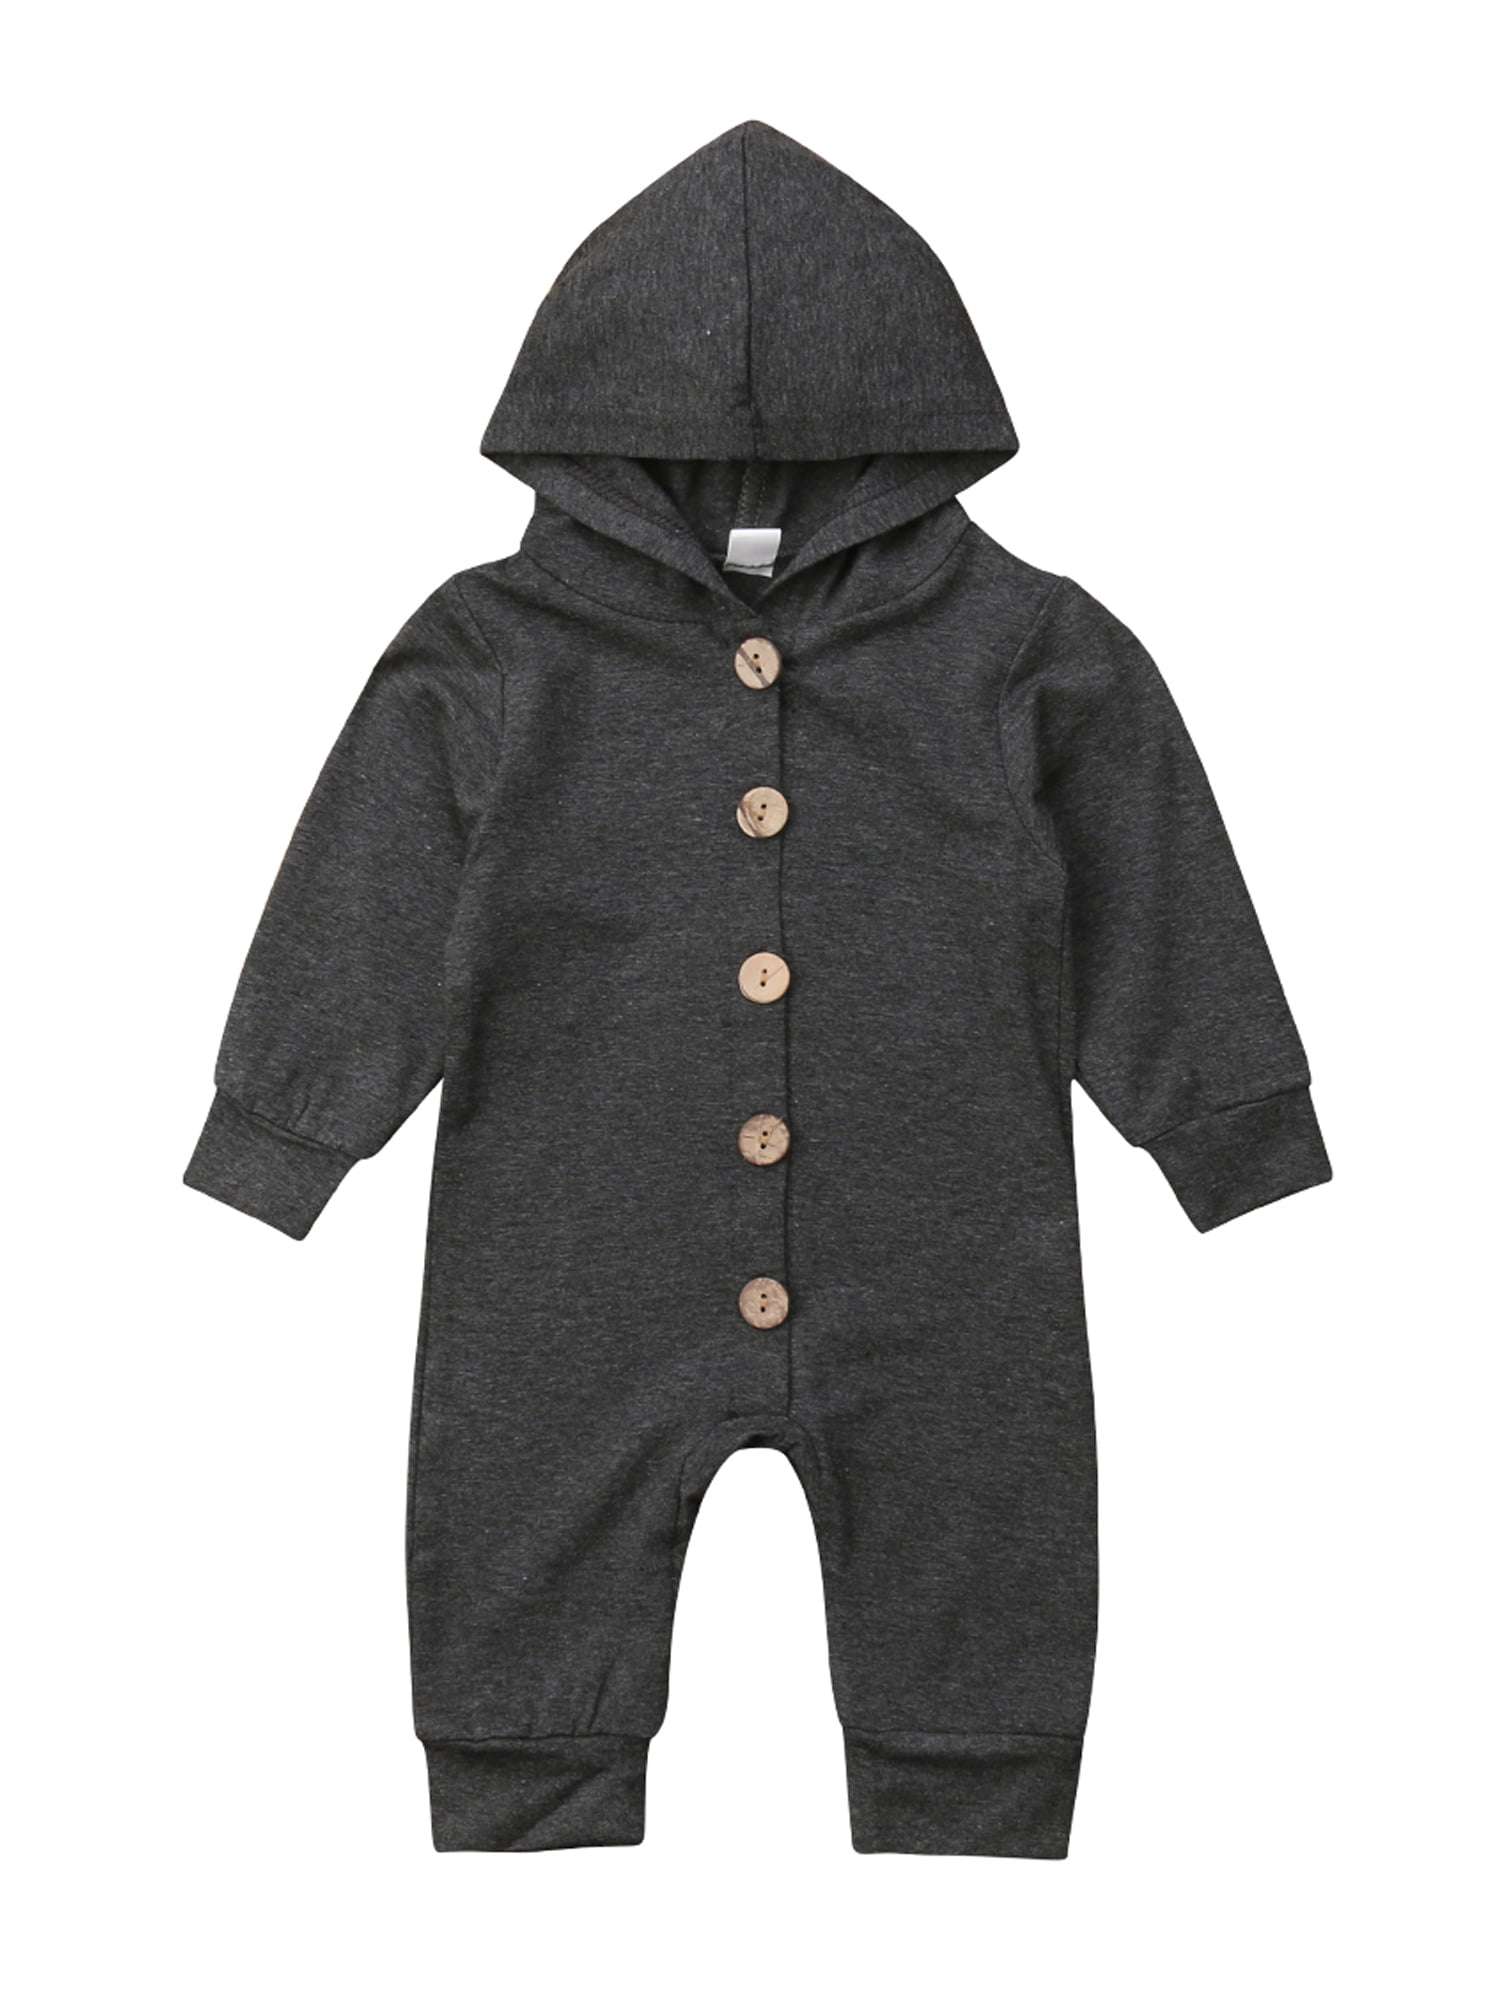 Solid Baby Boy Girl Winter Cotton Hooded Romper Jumpsuit Bodysuit Clothes Outfit